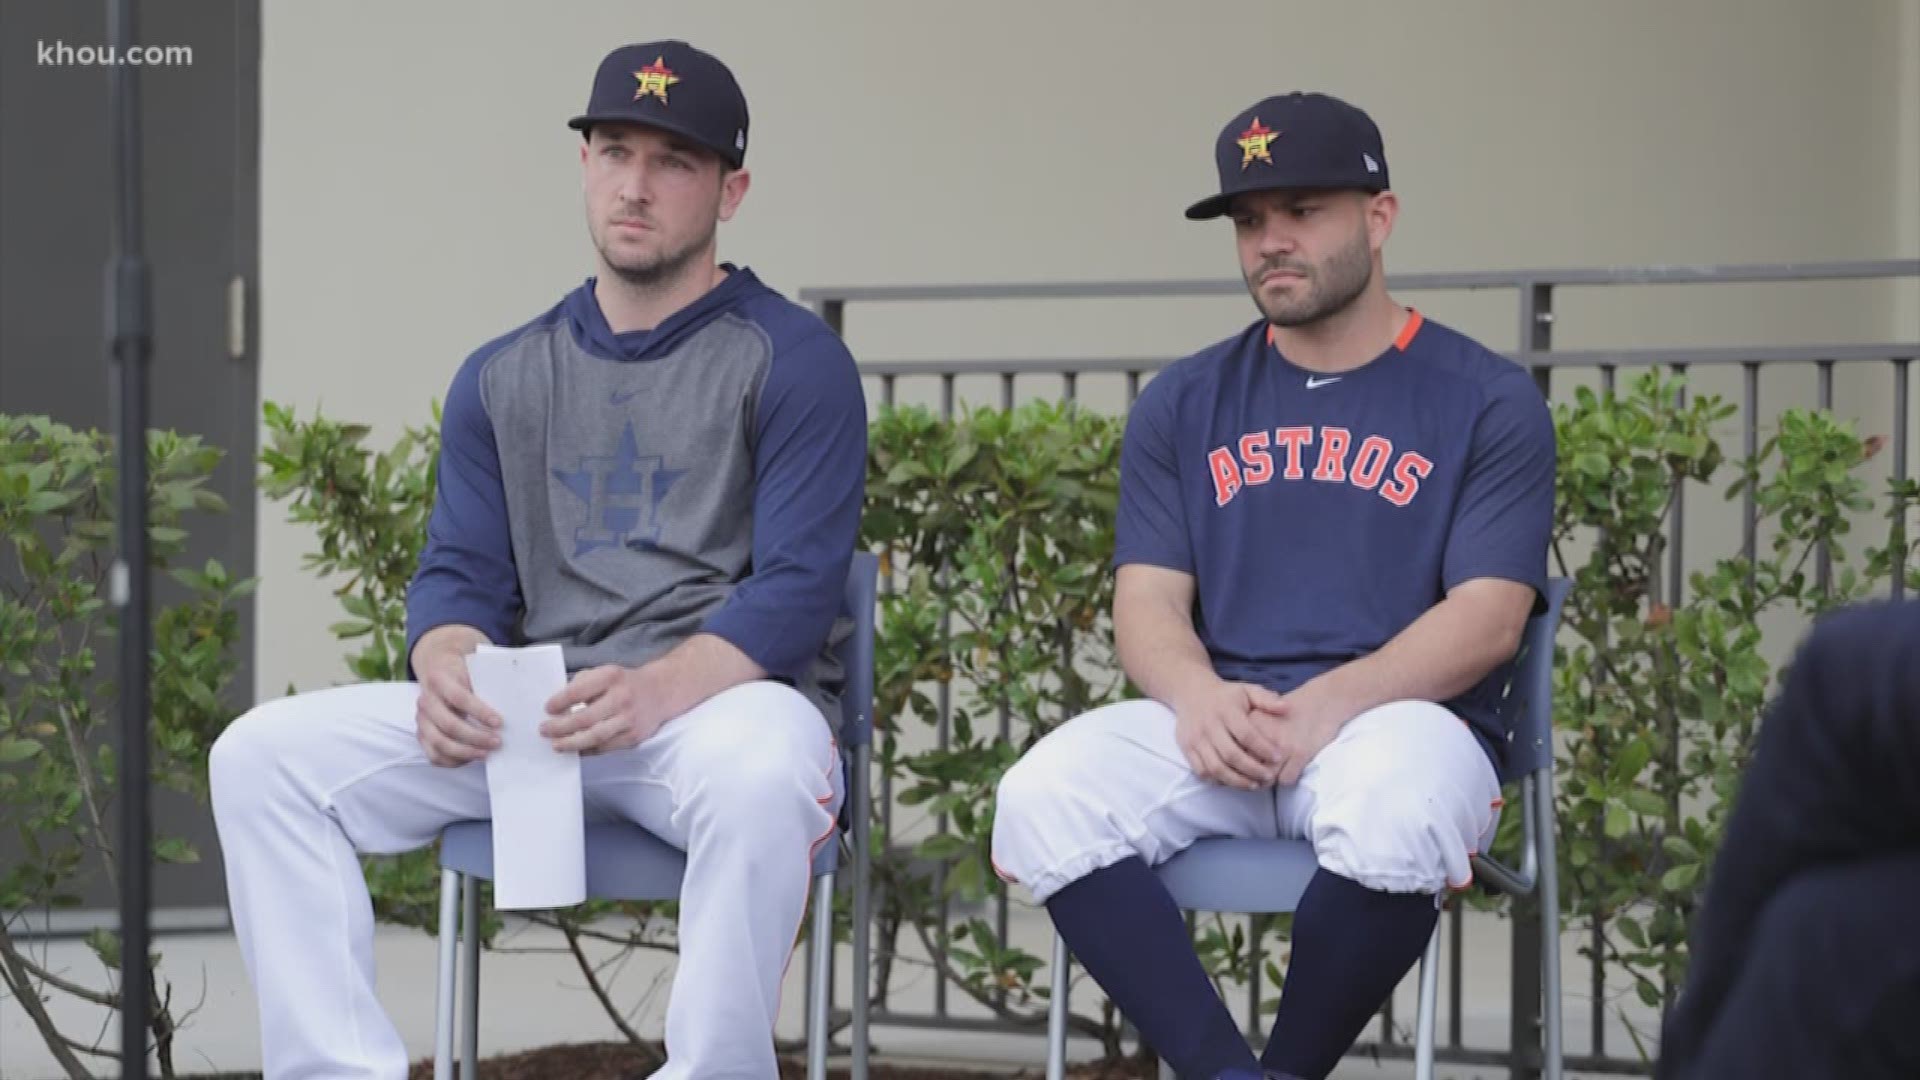 Several Astros stars apologized Thursday for the sign-stealing scandal that rocked Major League Baseball.